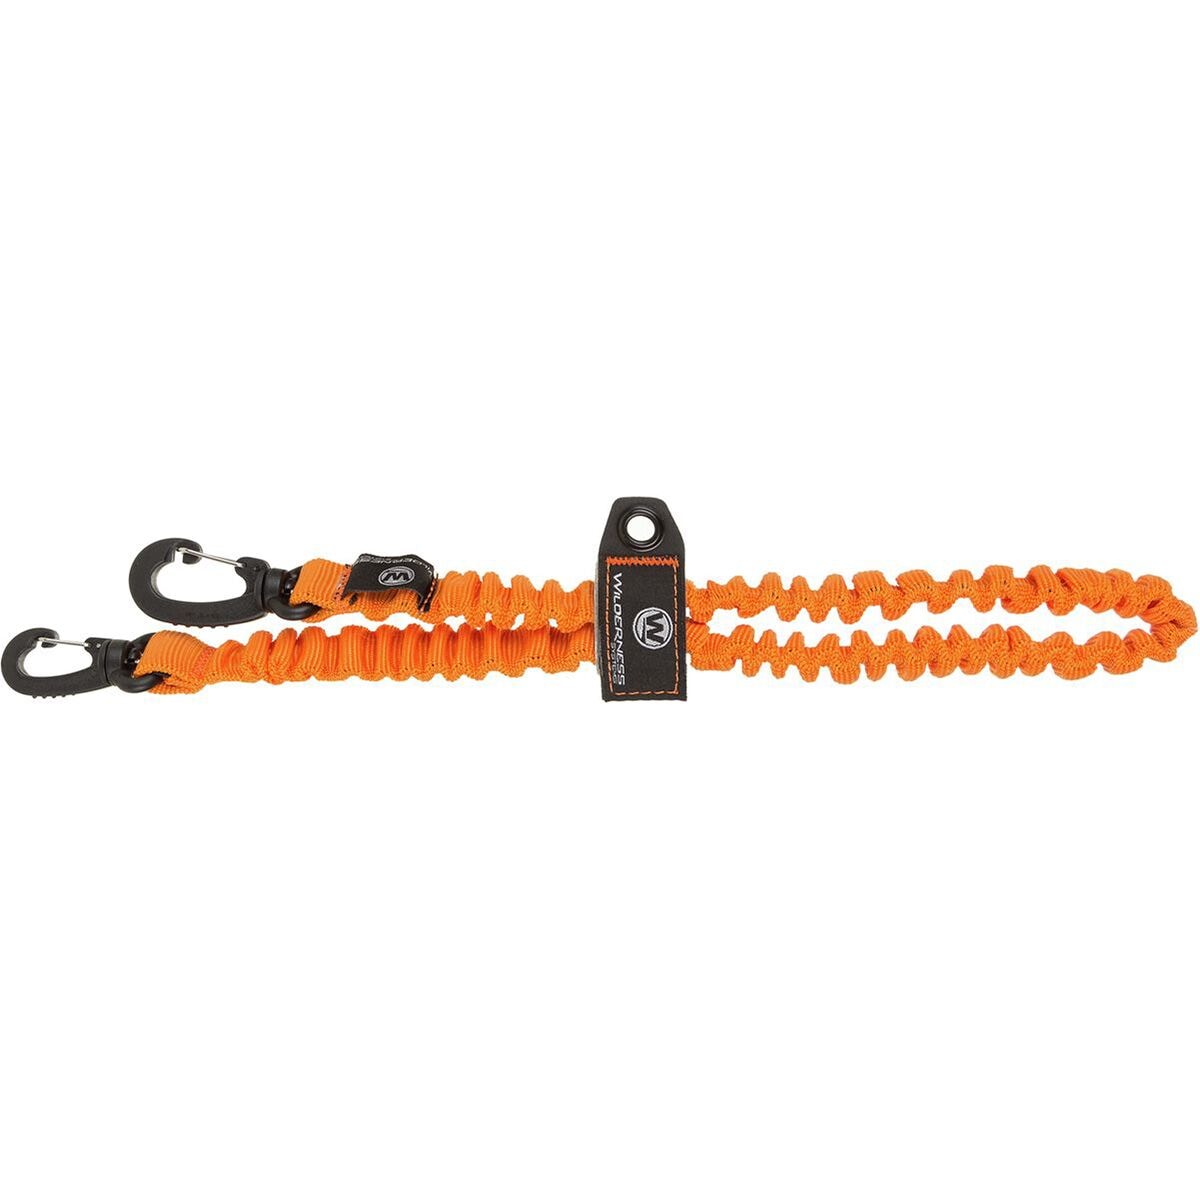 Wilderness Systems Rod Leash - Paddle